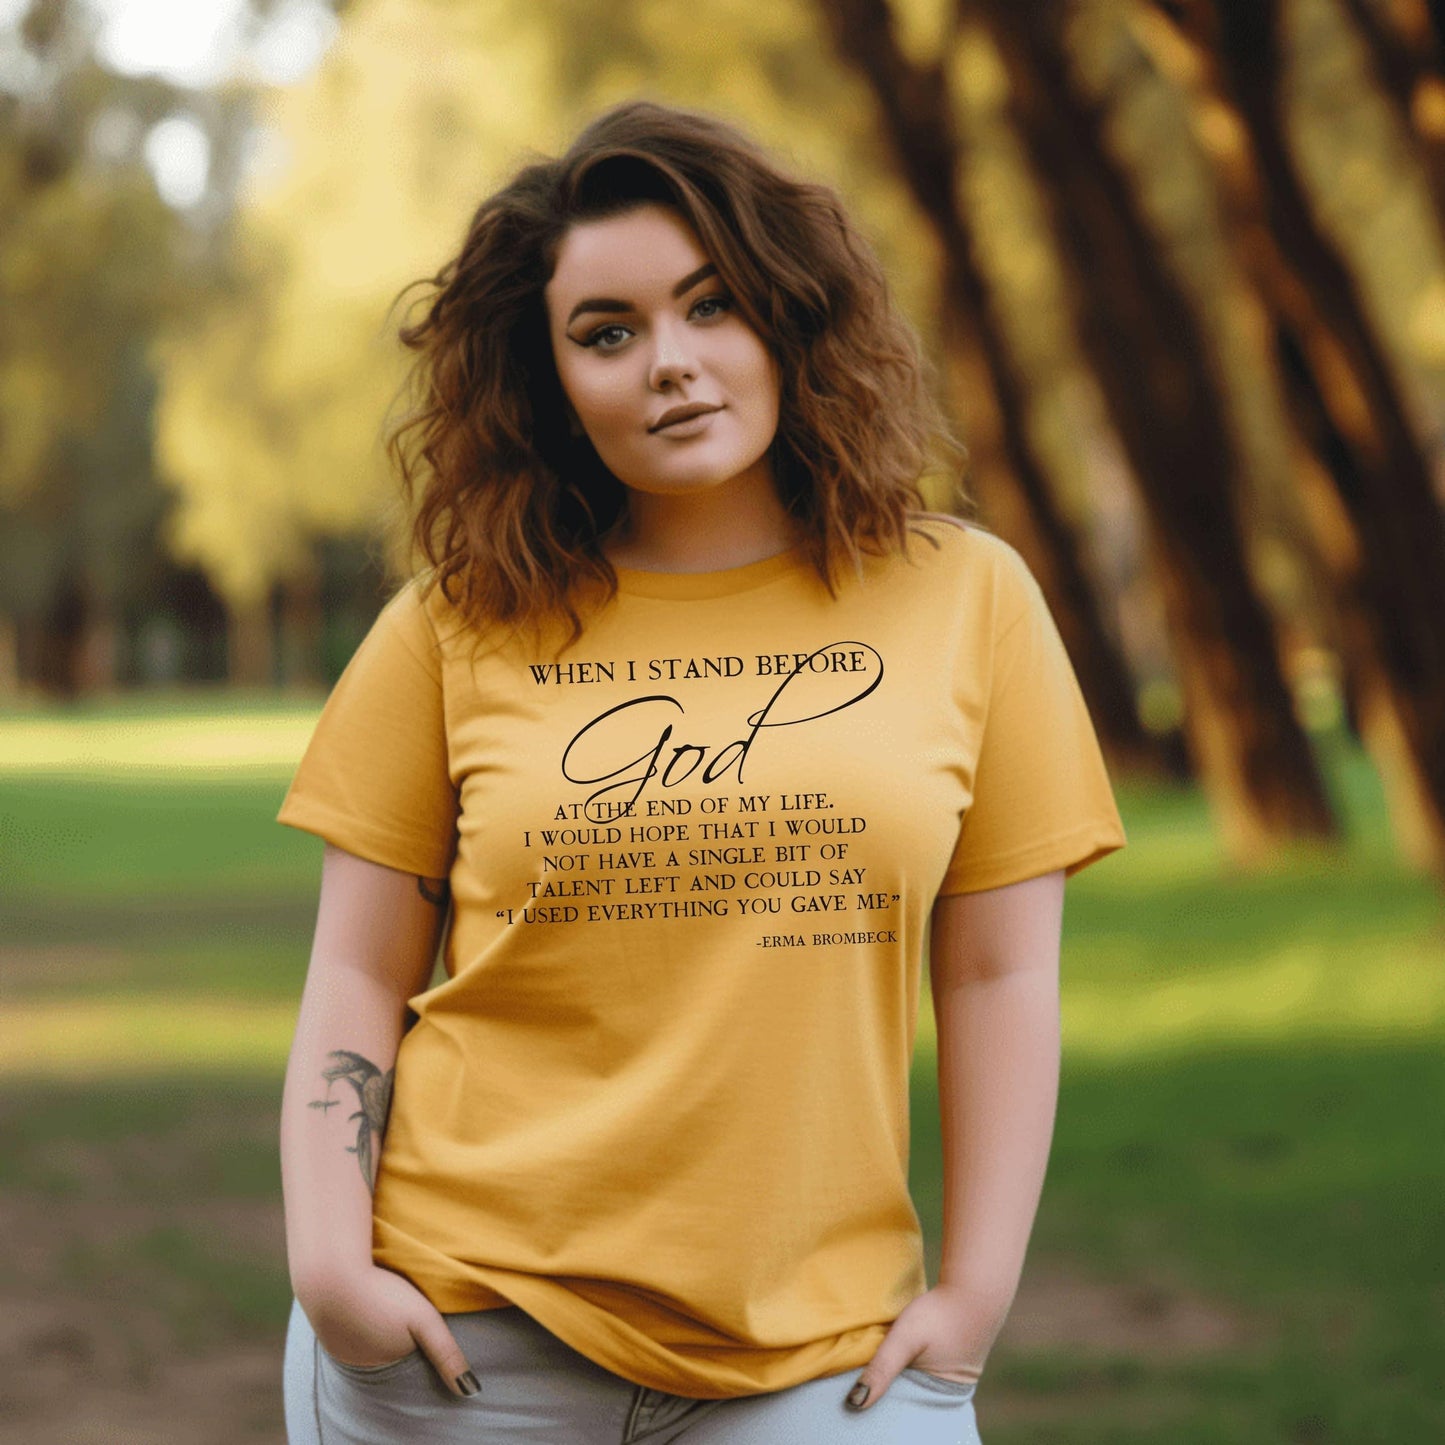 When I Stand Before God Women’s Plus Tee - JT Footprint Apparel